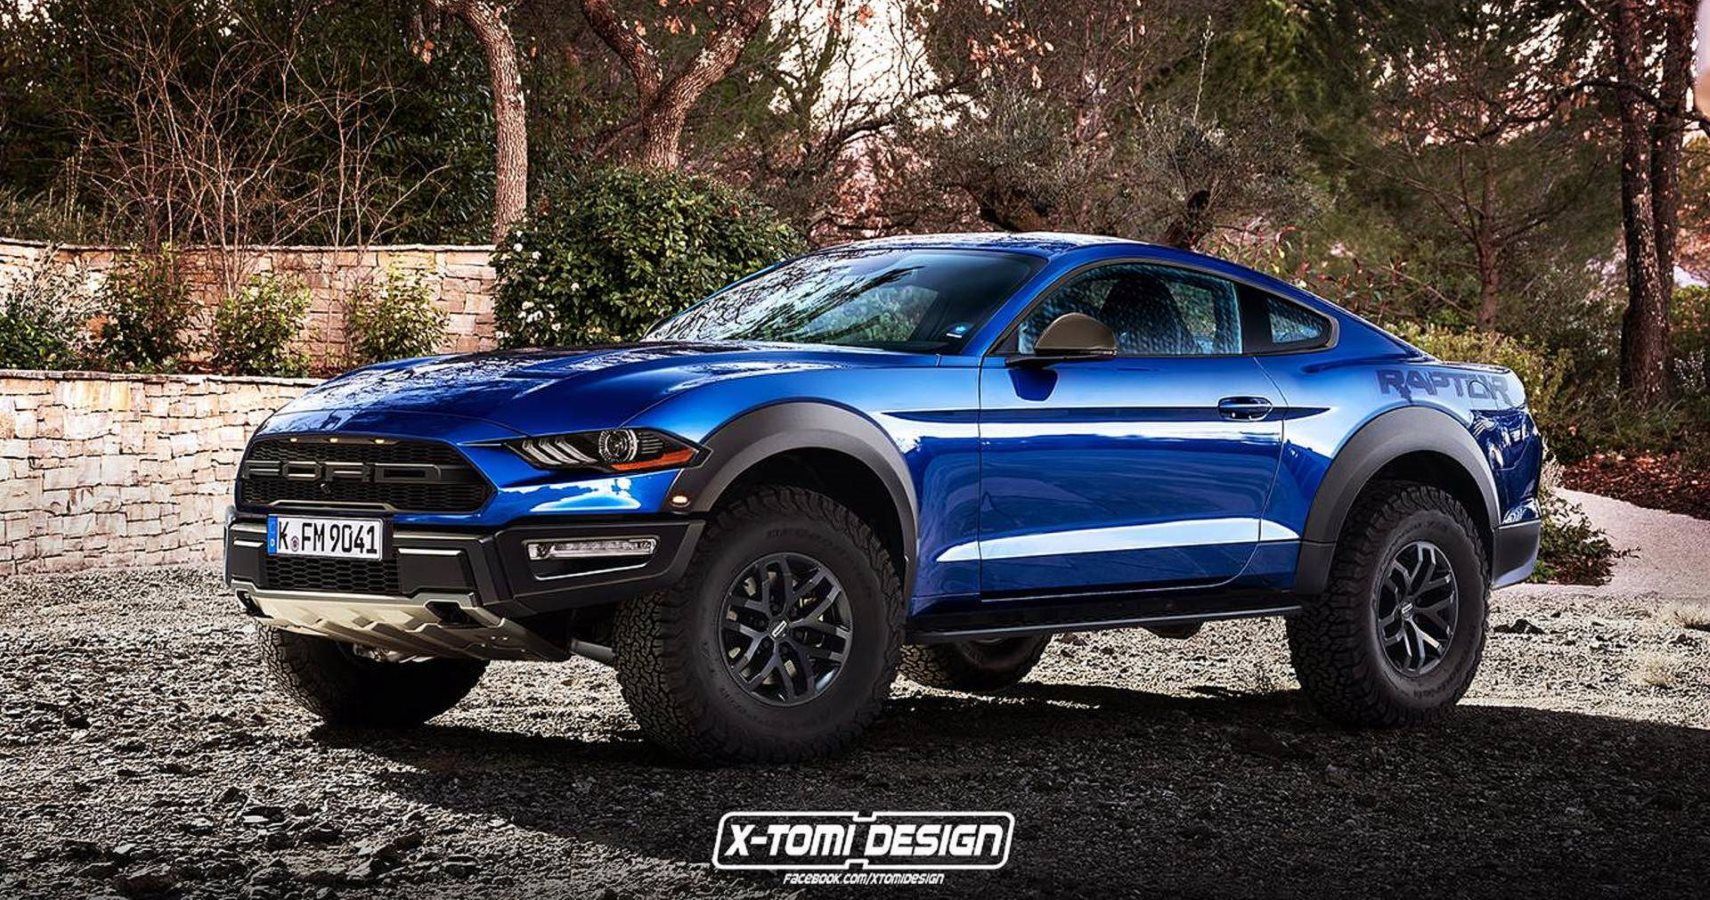 Ford To Make Non-Electric Mustang-Based Crossovers [RUMOR]